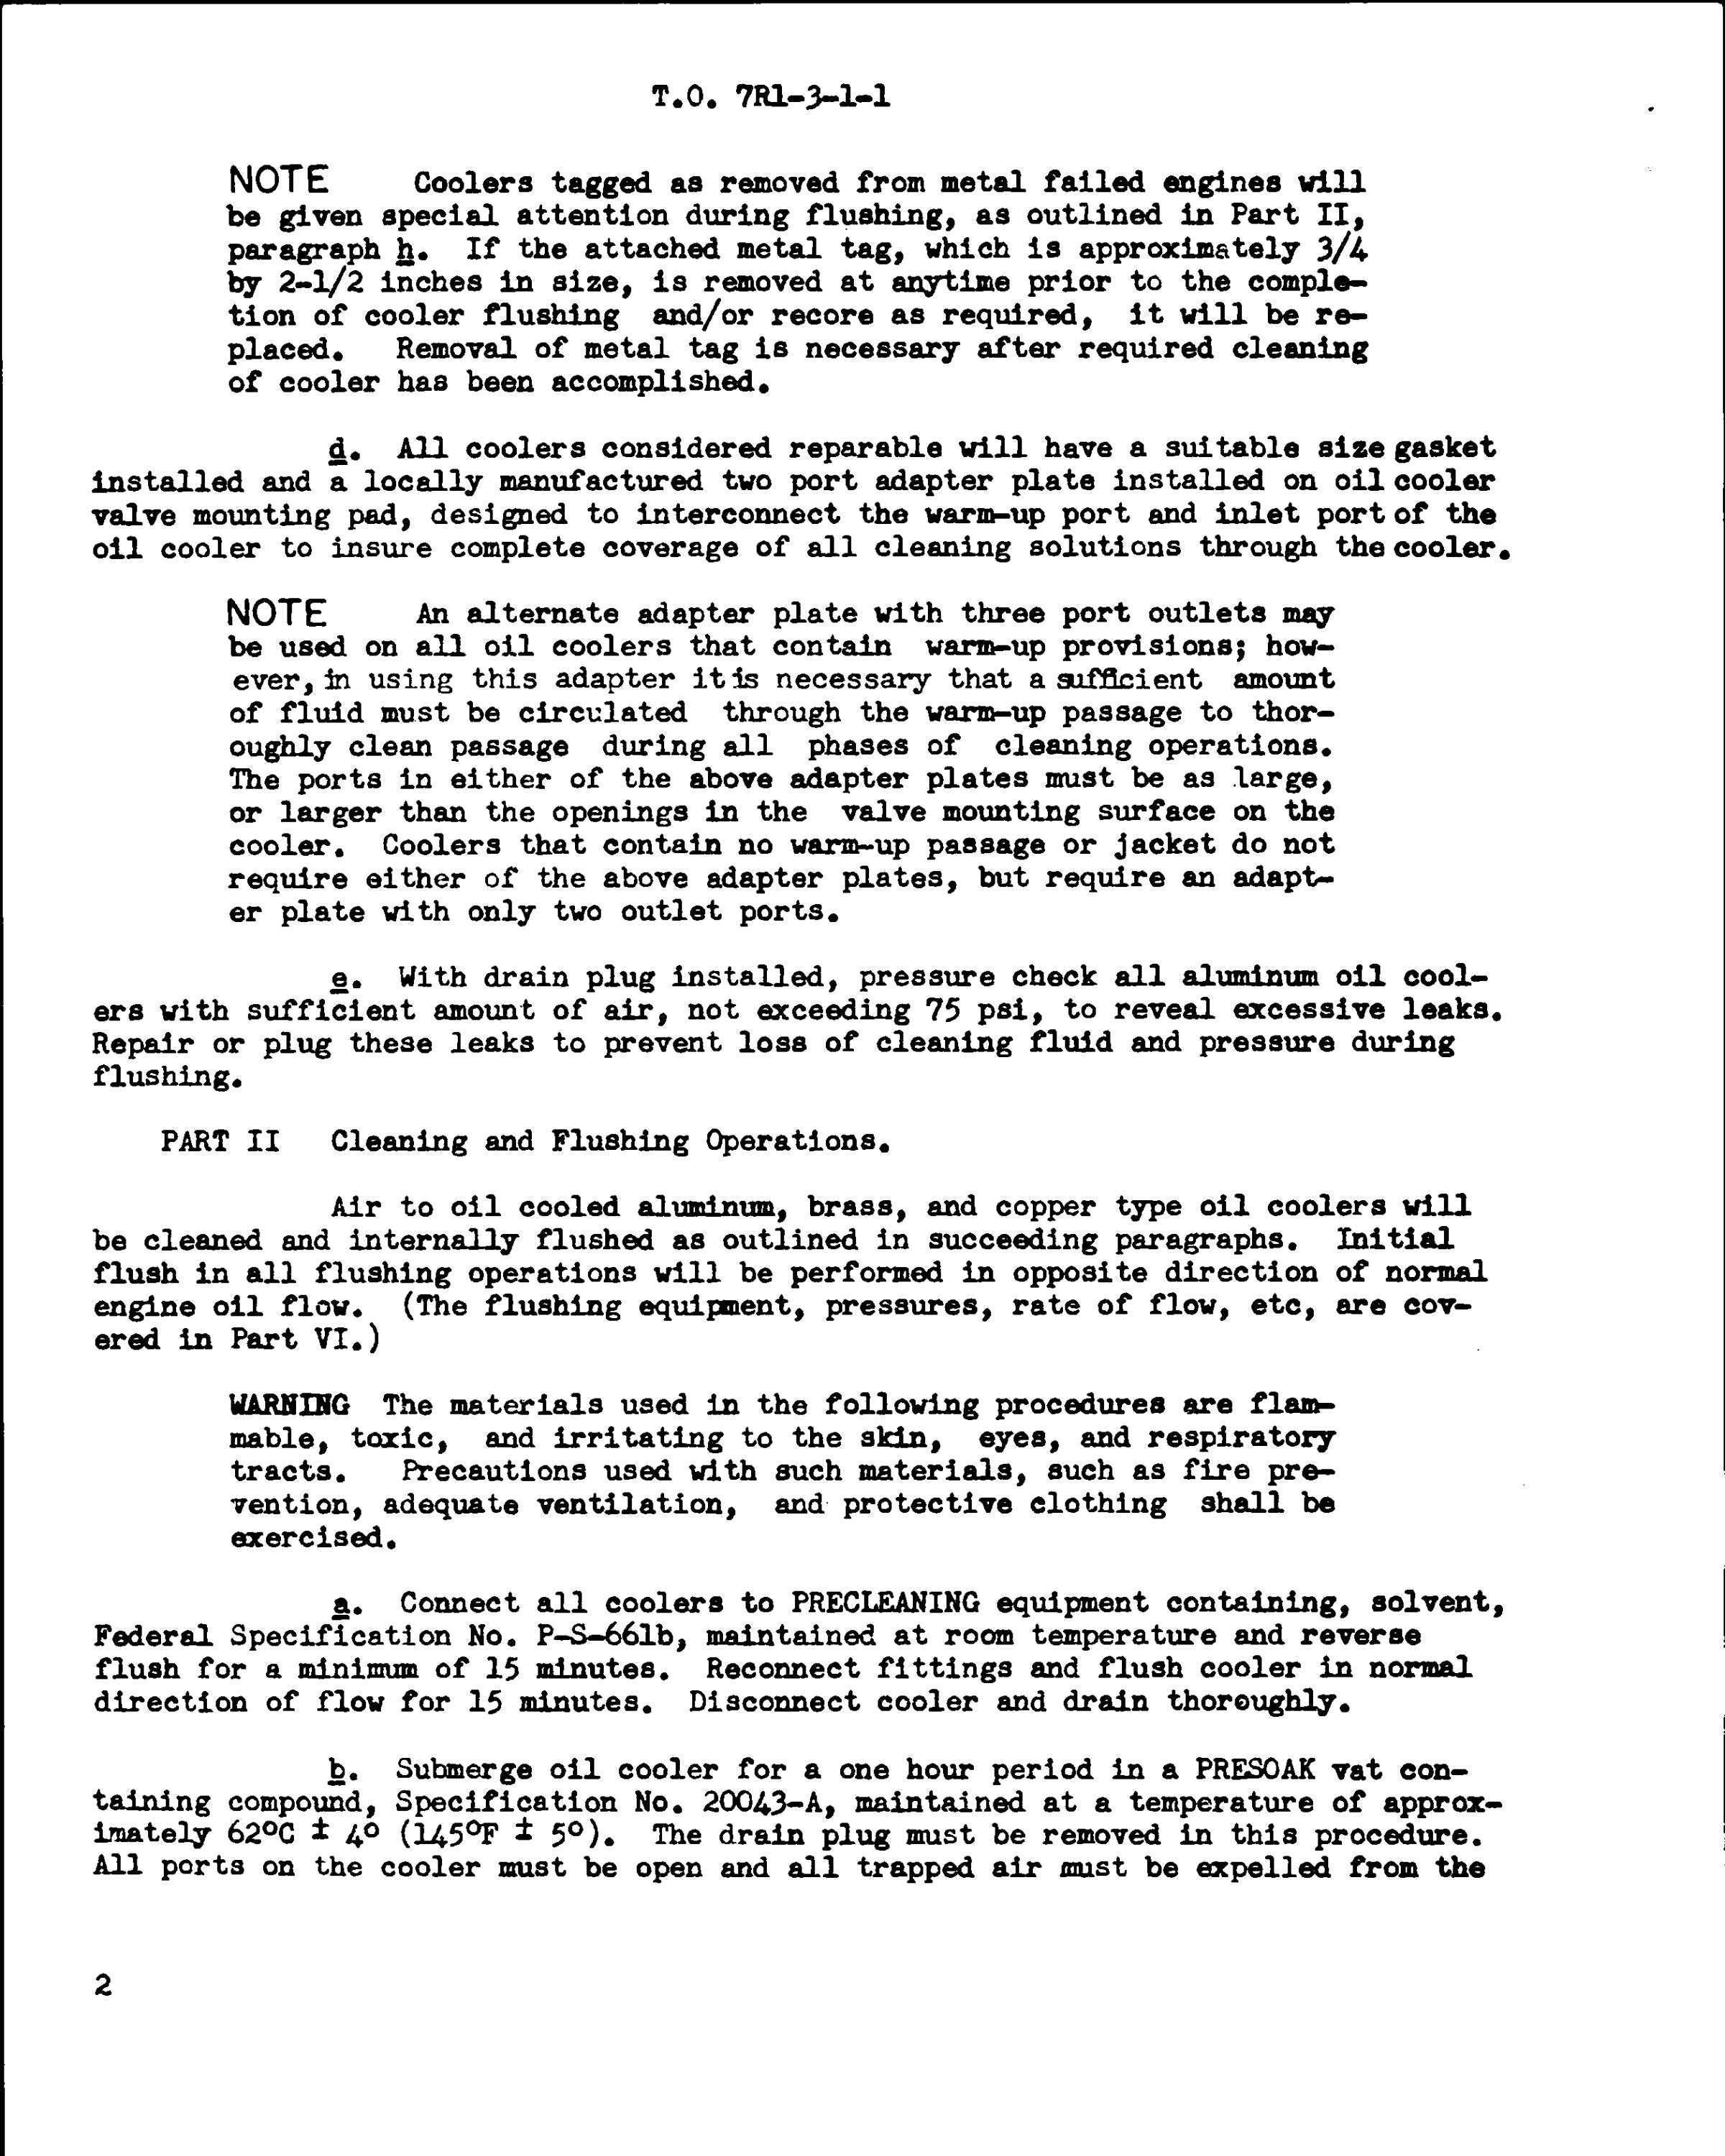 Sample page 2 from AirCorps Library document: Treatment of Air to Oil Cooled Aluminum, Brass & Copper